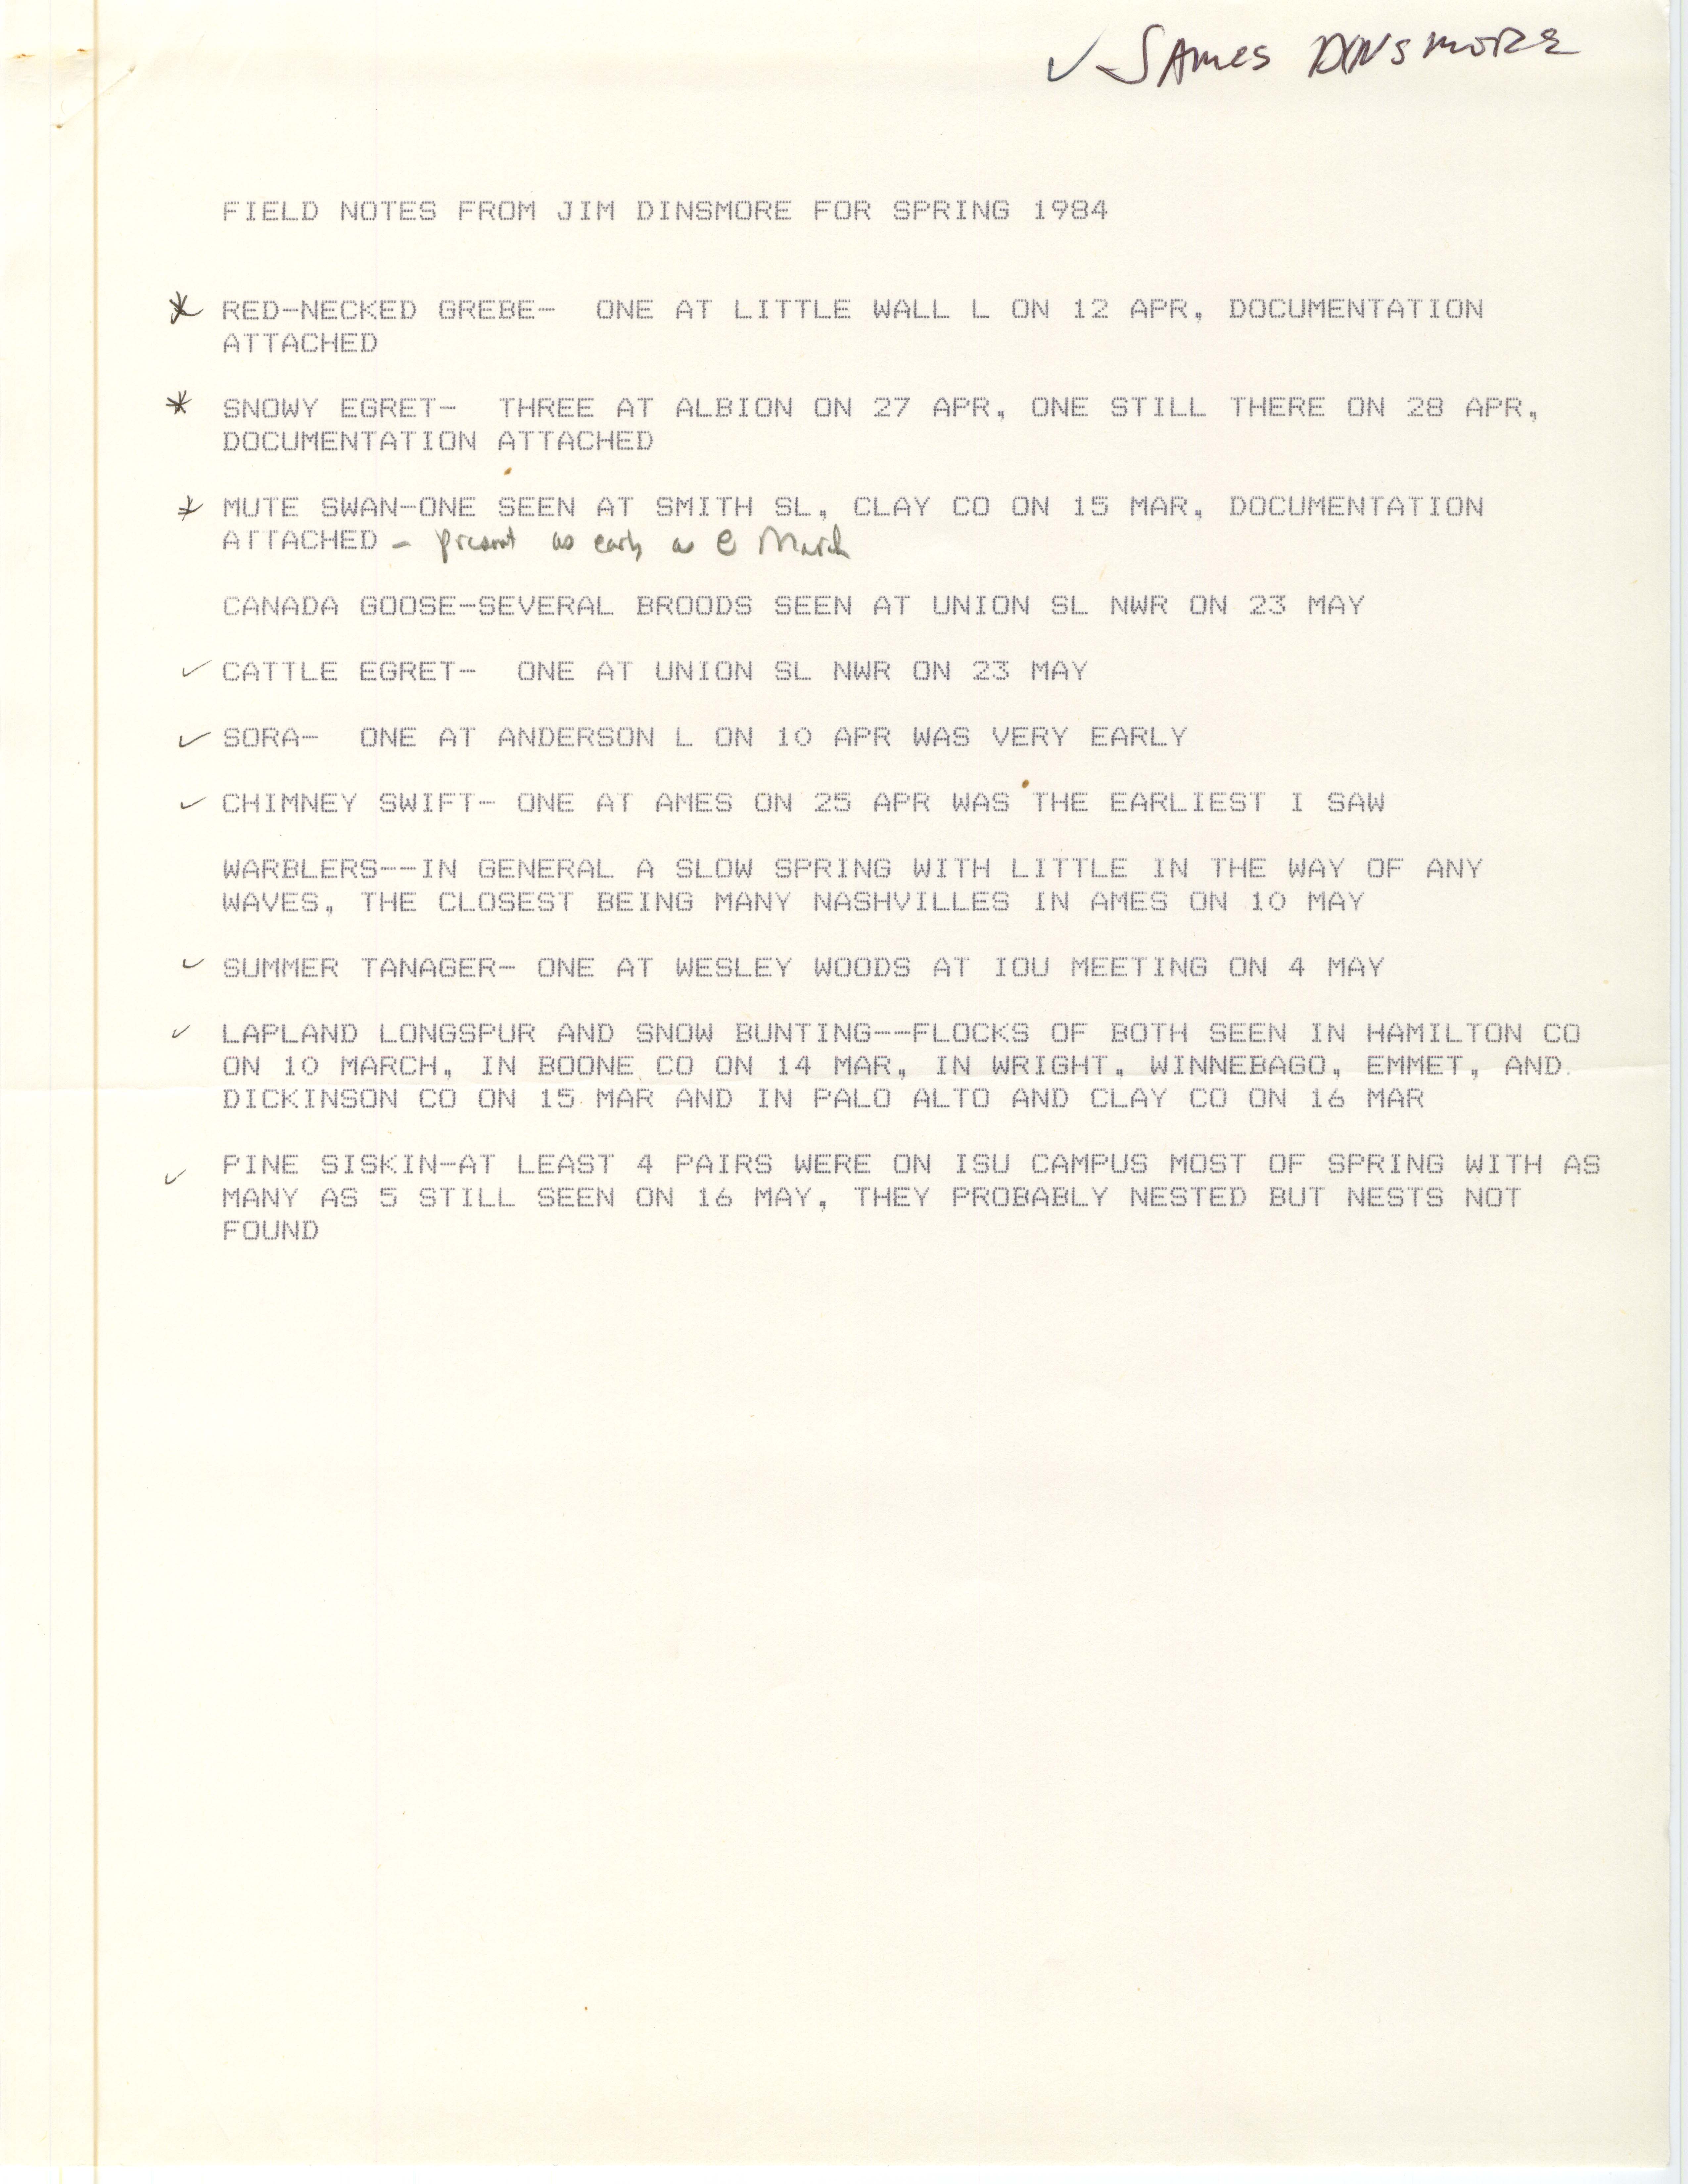 Field notes contributed by James  J. Dinsmore, spring 1984